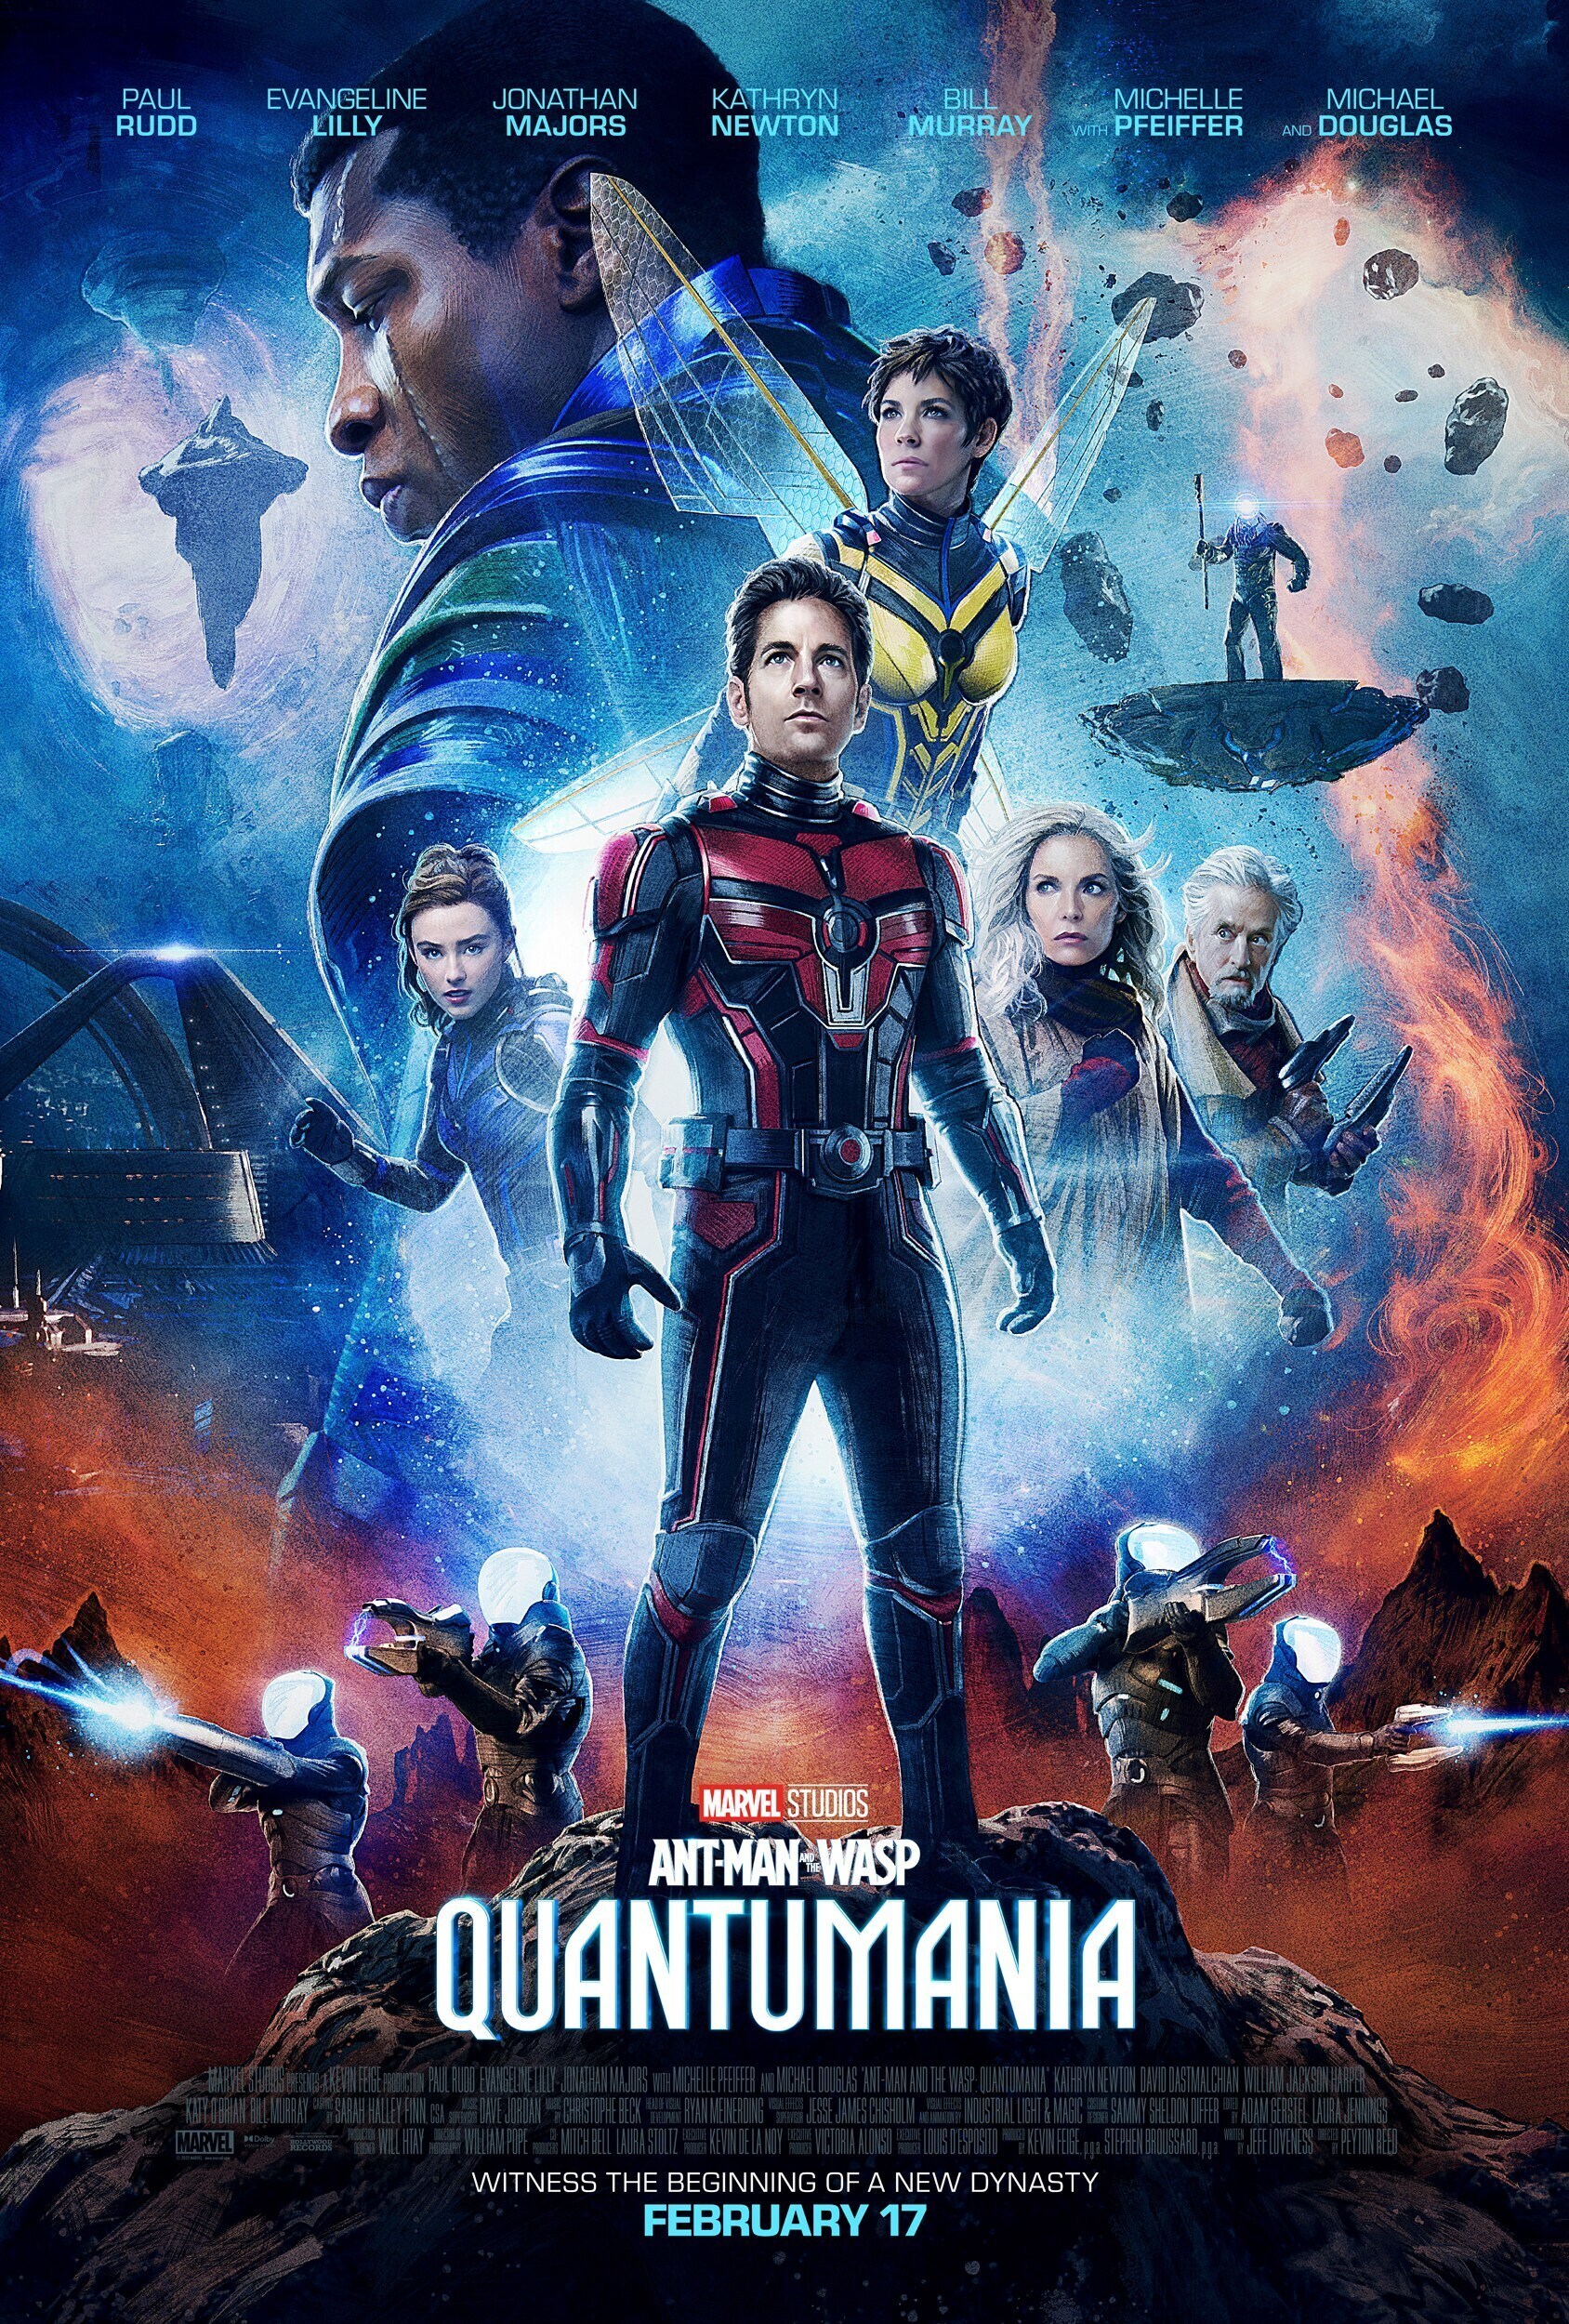 Ant-Man and the Wasp: Quantumania poster.